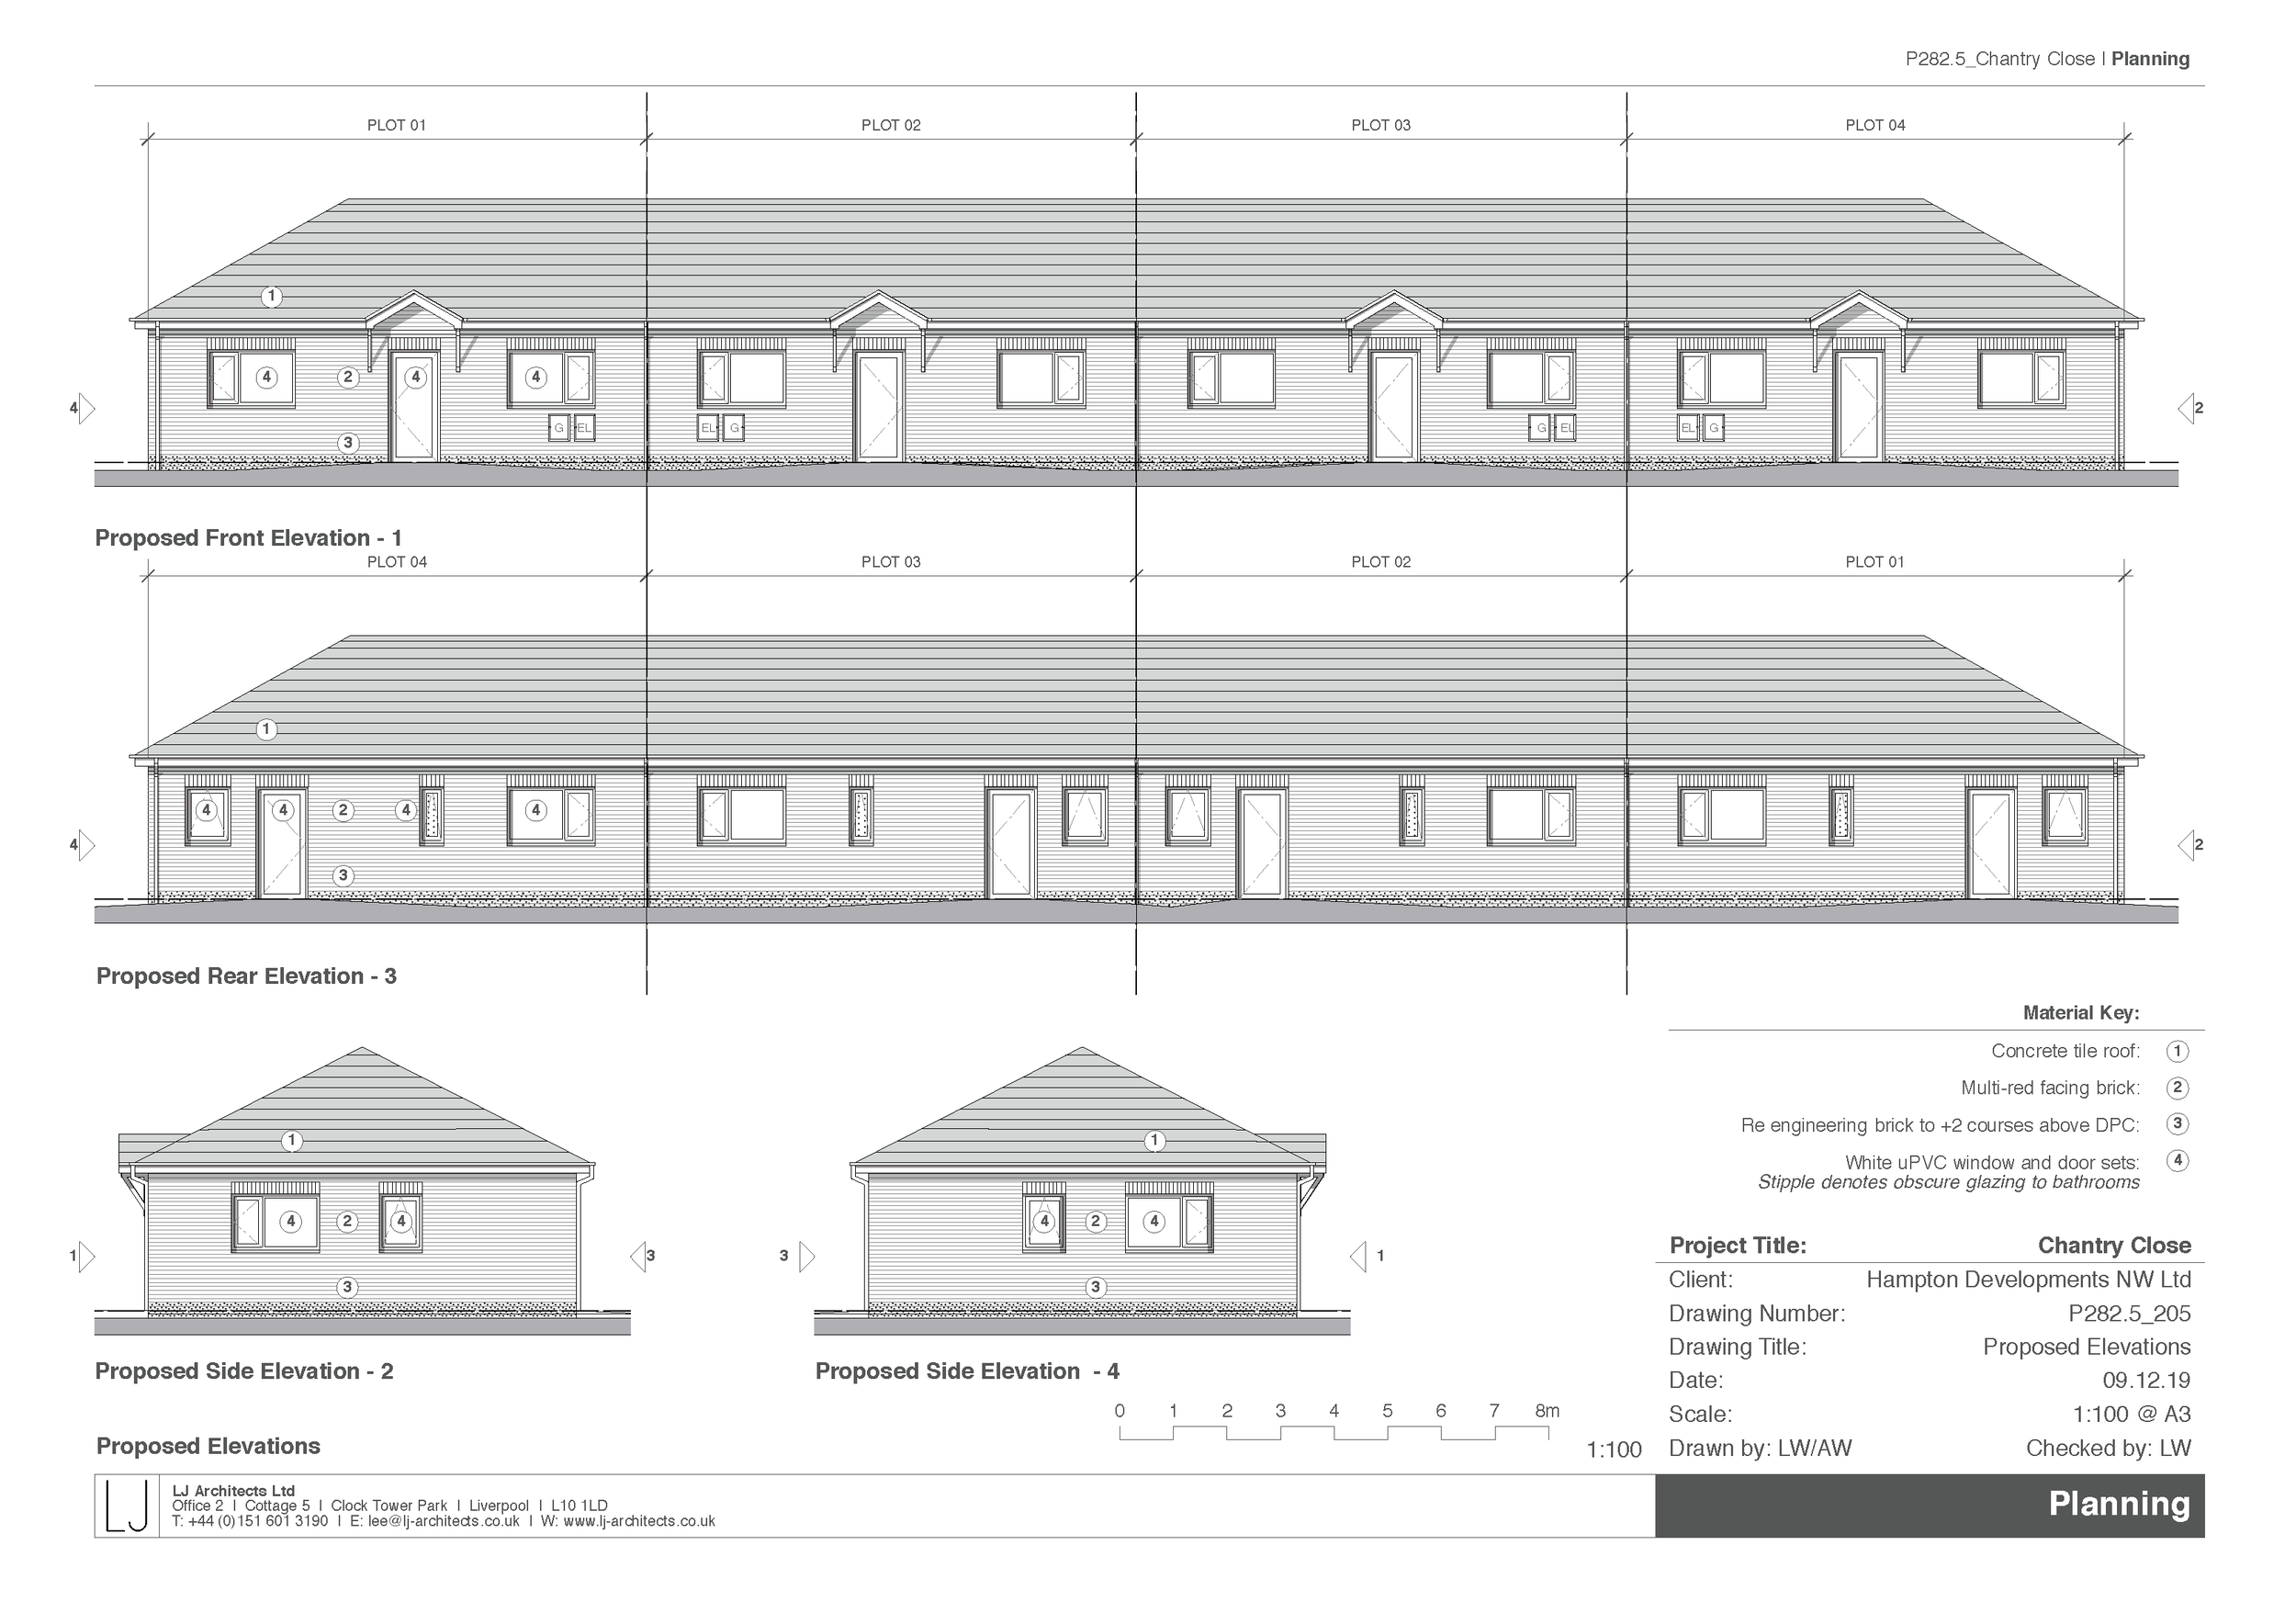 P282.5_205 Proposed Elevations - Chantry Close.png